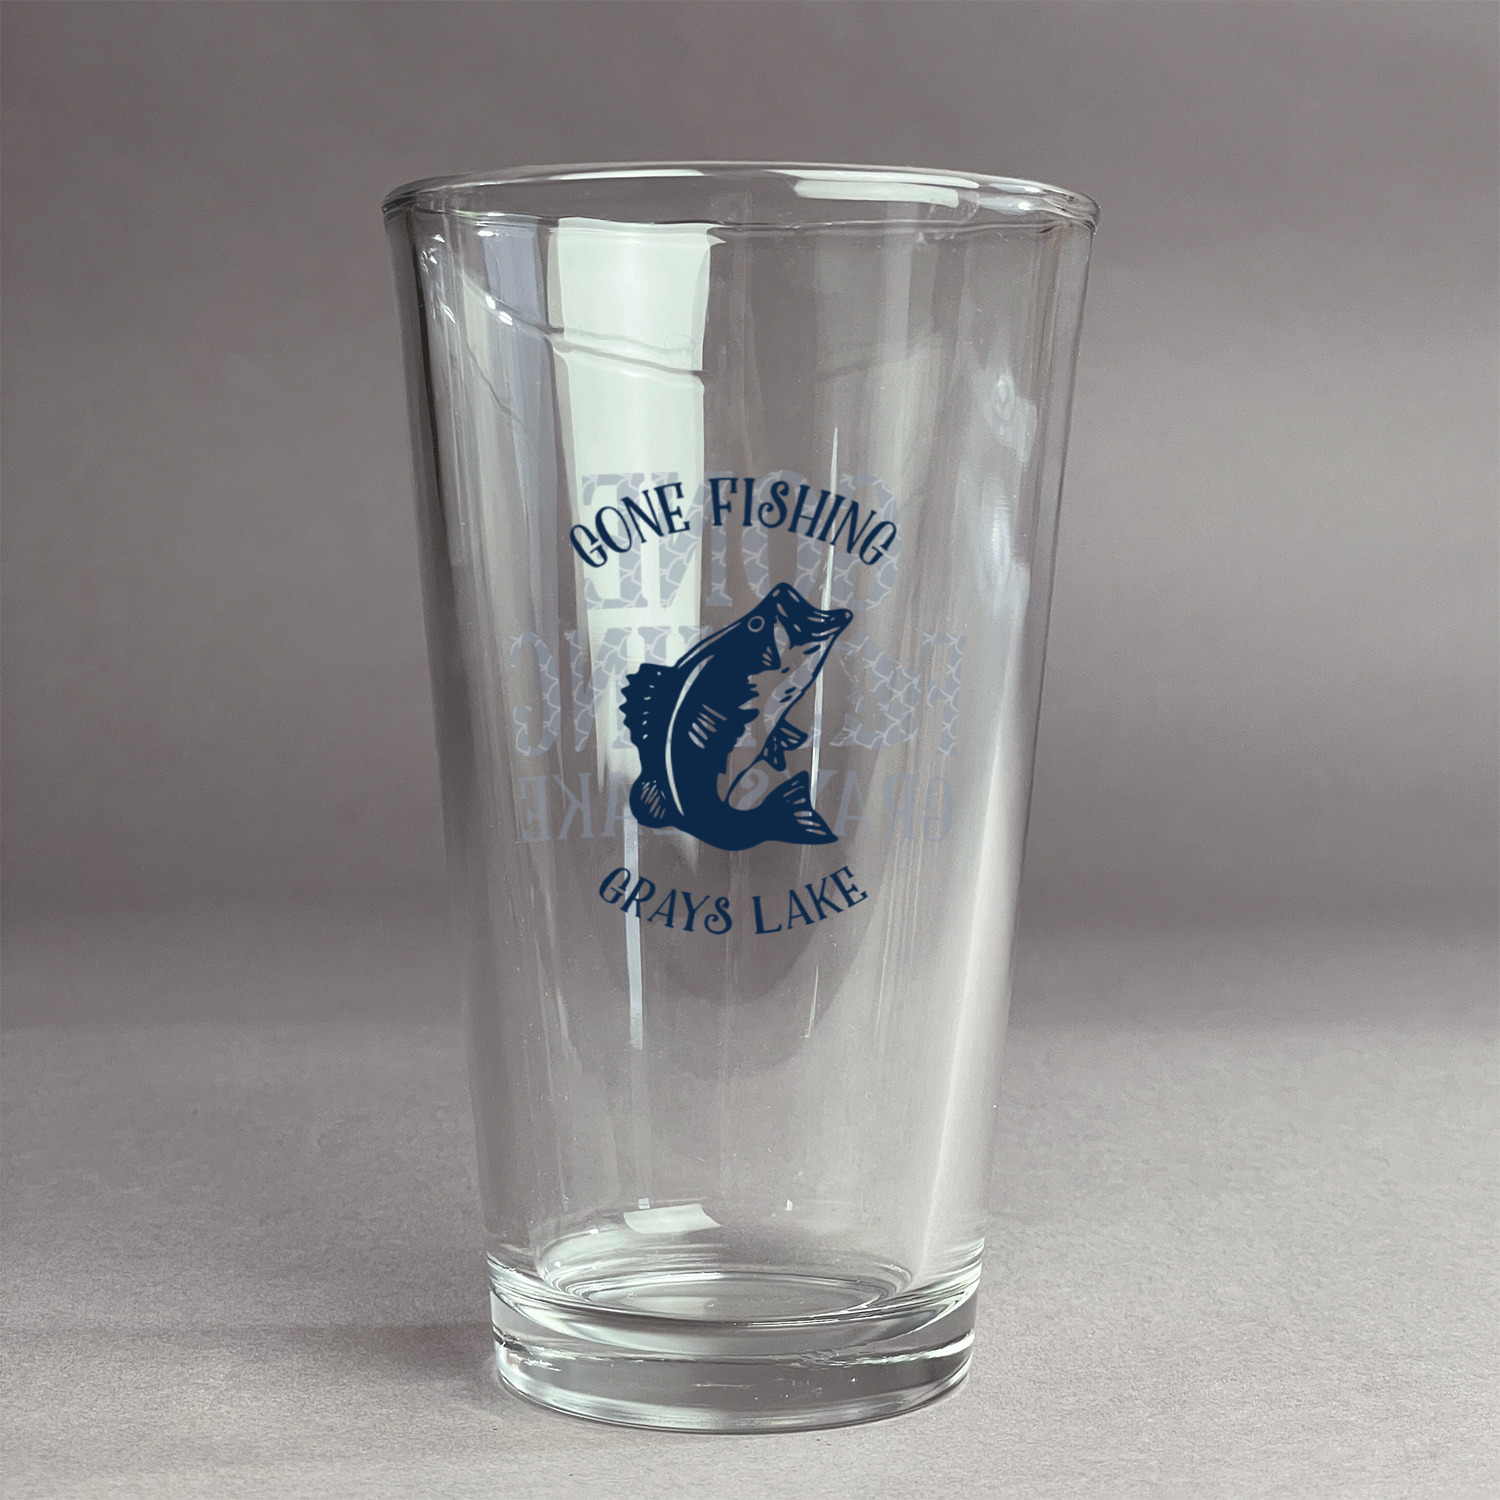 https://www.youcustomizeit.com/common/MAKE/1038229/Gone-Fishing-Pint-Glass-Two-Content-Front-Main.jpg?lm=1654889755